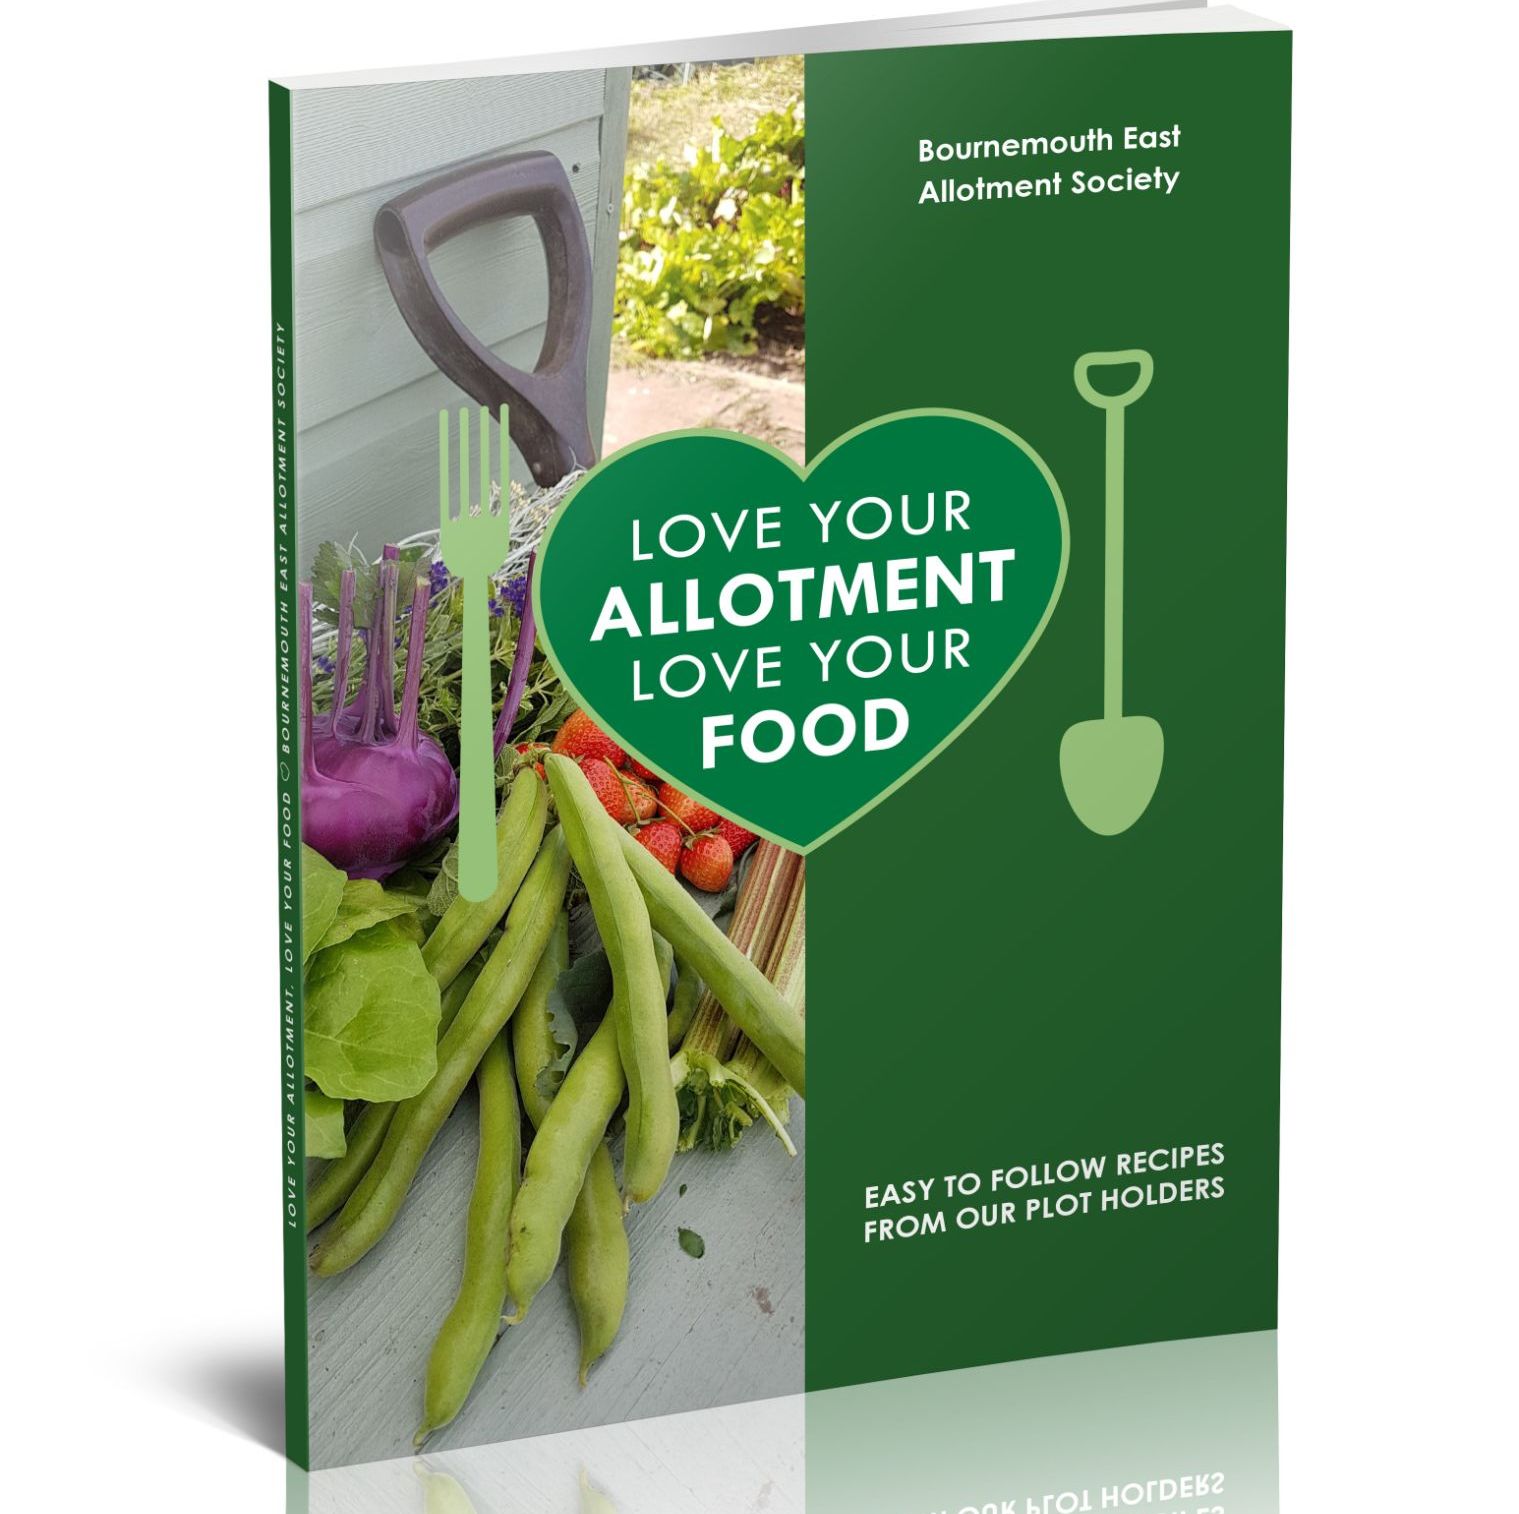 Cook book of easy to follow recipes using grow your own ingredients